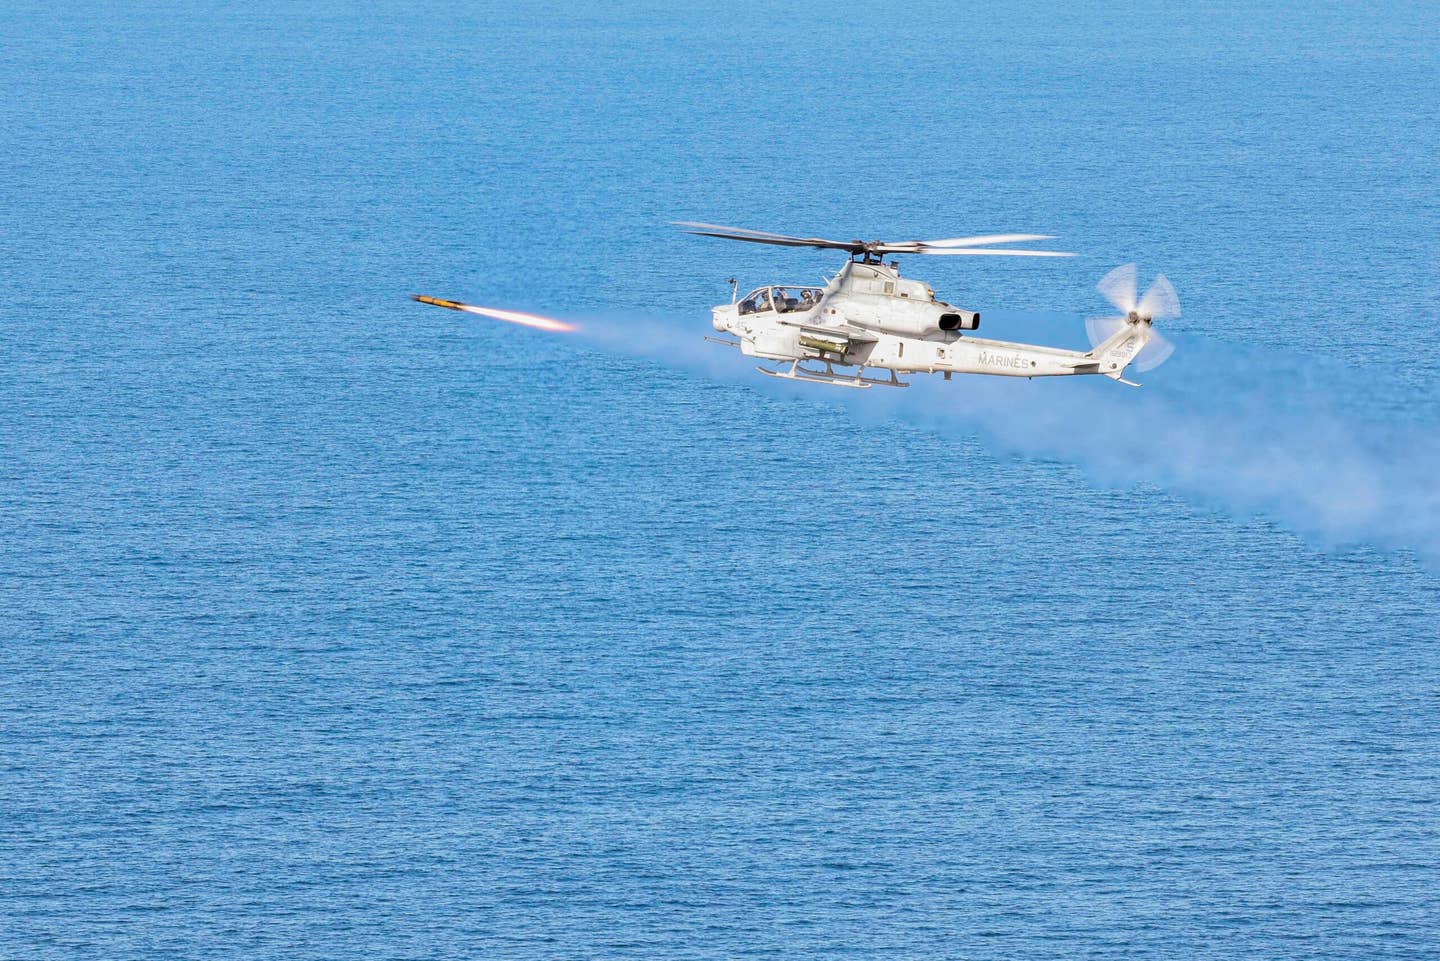 An AH-1Z helicopter from Marine Light Attack Helicopter Squadron 369 fires a JAGM at a moving maritime target during Exercise Steel Knight 23, over the Pacific Ocean, in December 2022. <em>U.S. Marine Corps photo by Sgt. Samuel Fletcher</em>